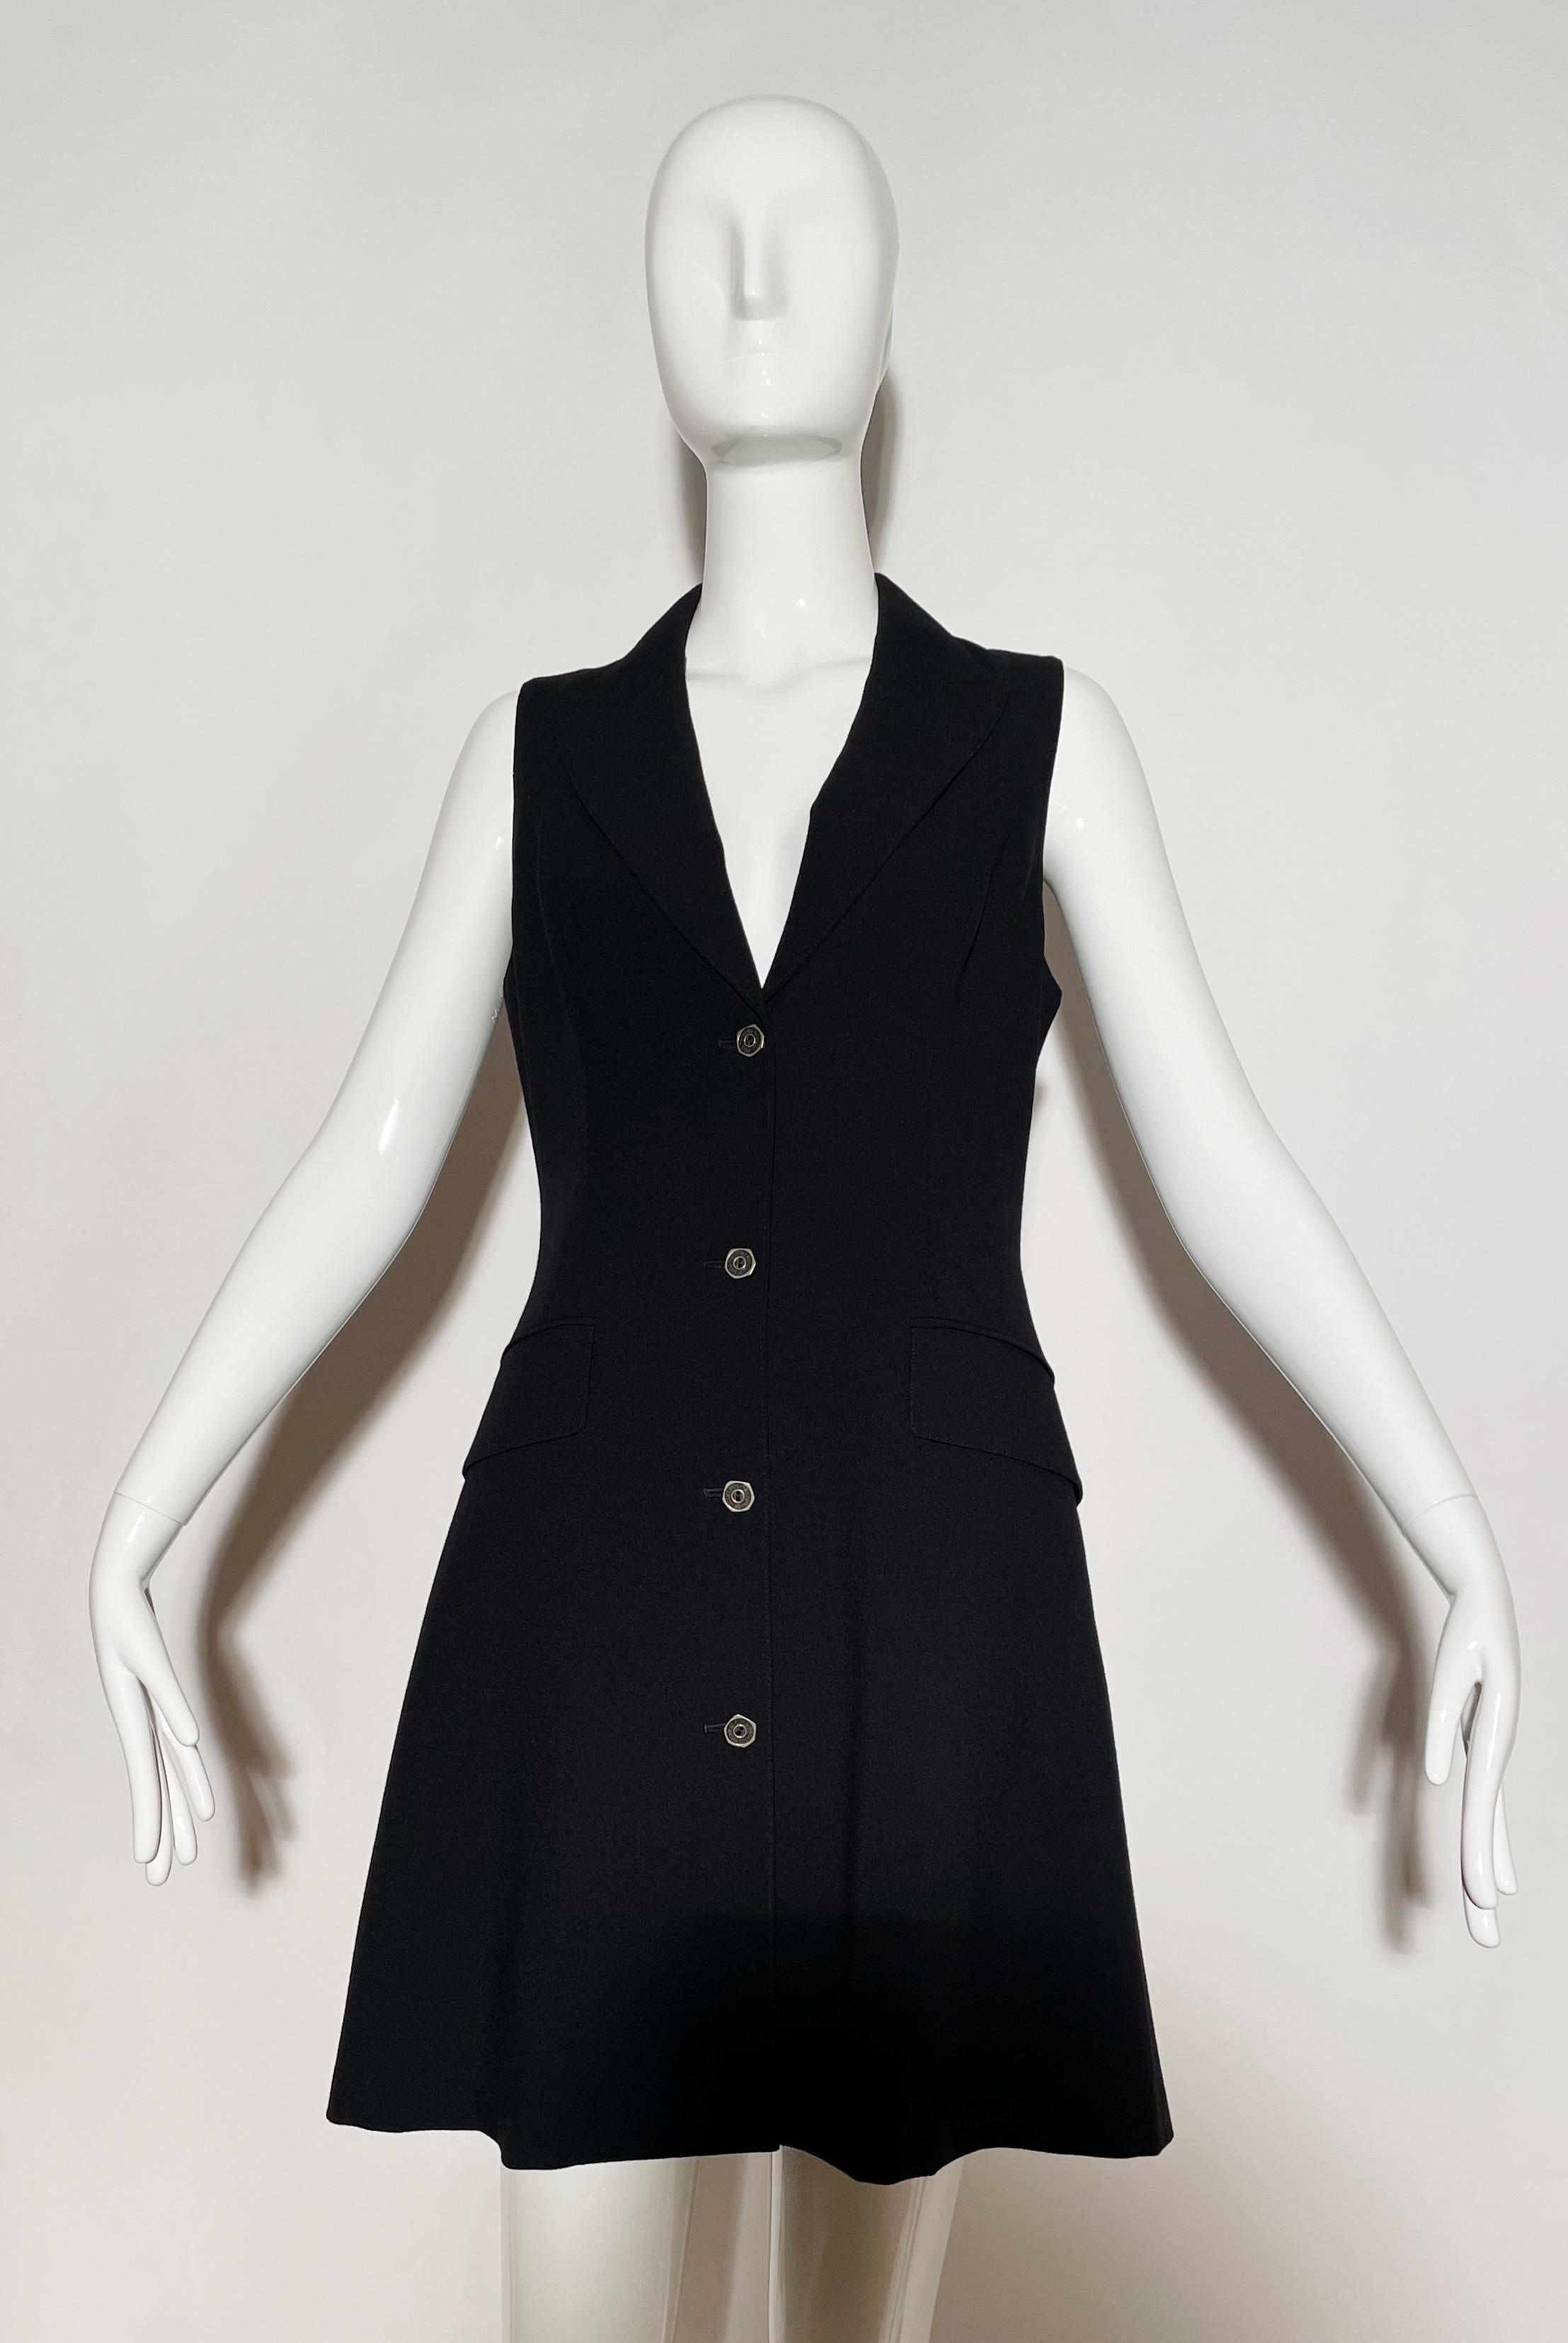 Black sleeveless blazer dress. Vest style. Lapel. Front pockets. Button closures. Lined. Wool. Made in Italy. 
*Condition: excellent vintage condition. No visible flaws.

Measurements Taken Laying Flat (inches)—
Shoulder to Shoulder: 13 in.
Bust: 32